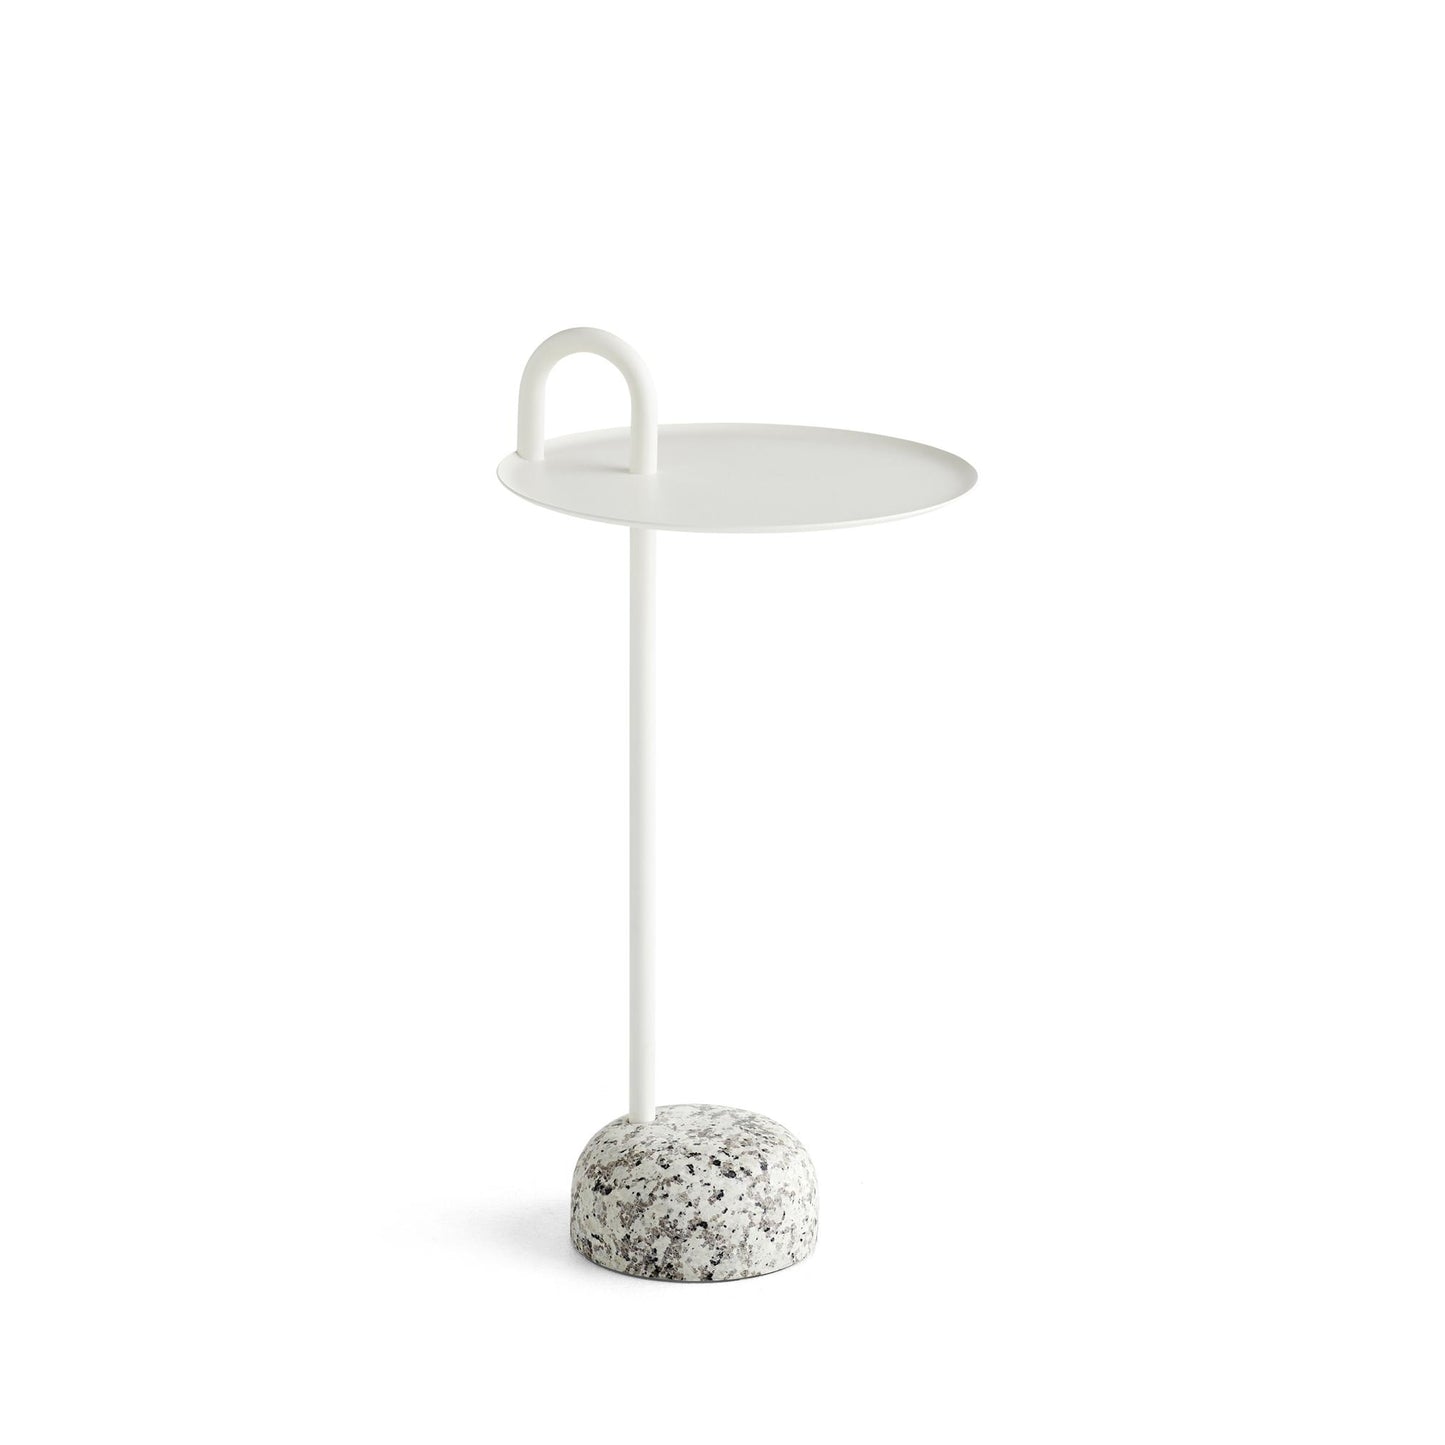 Bowler Side Table by HAY #Granite/ Cream White